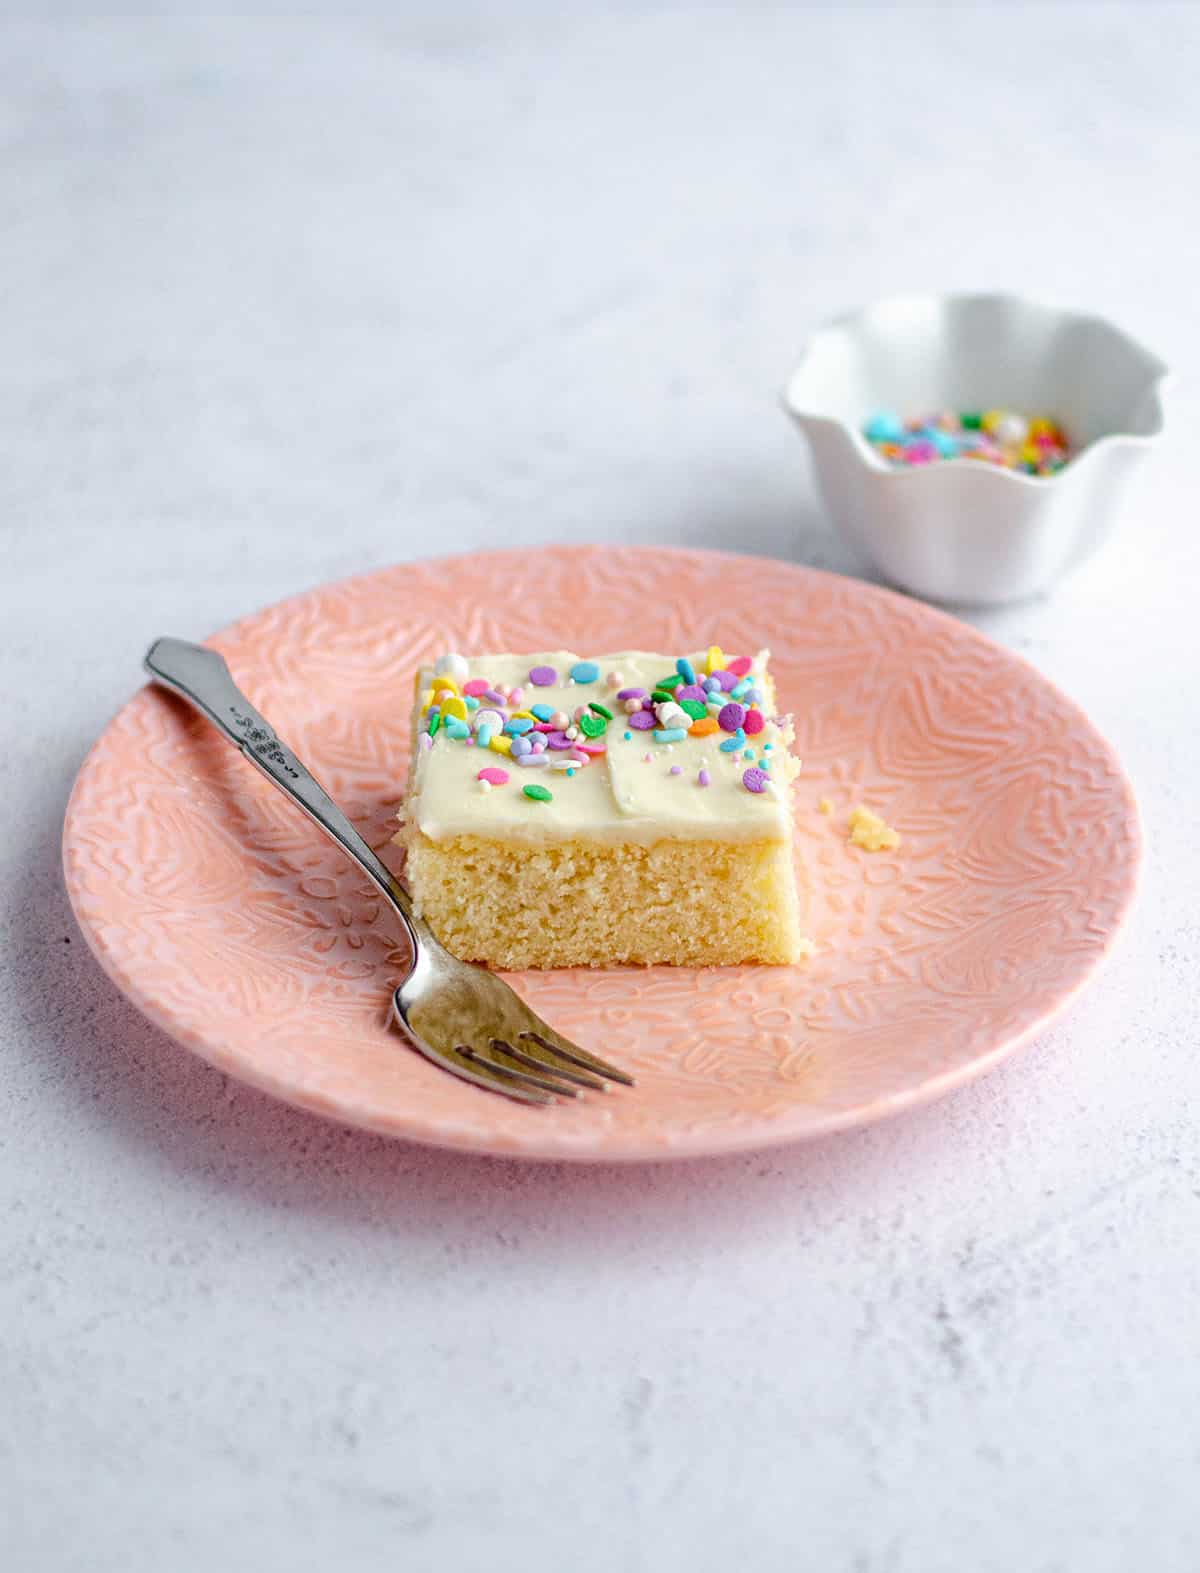 Simple White Sheet Cake: A perfectly moist and simple white cake that pairs with any frosting you prefer.